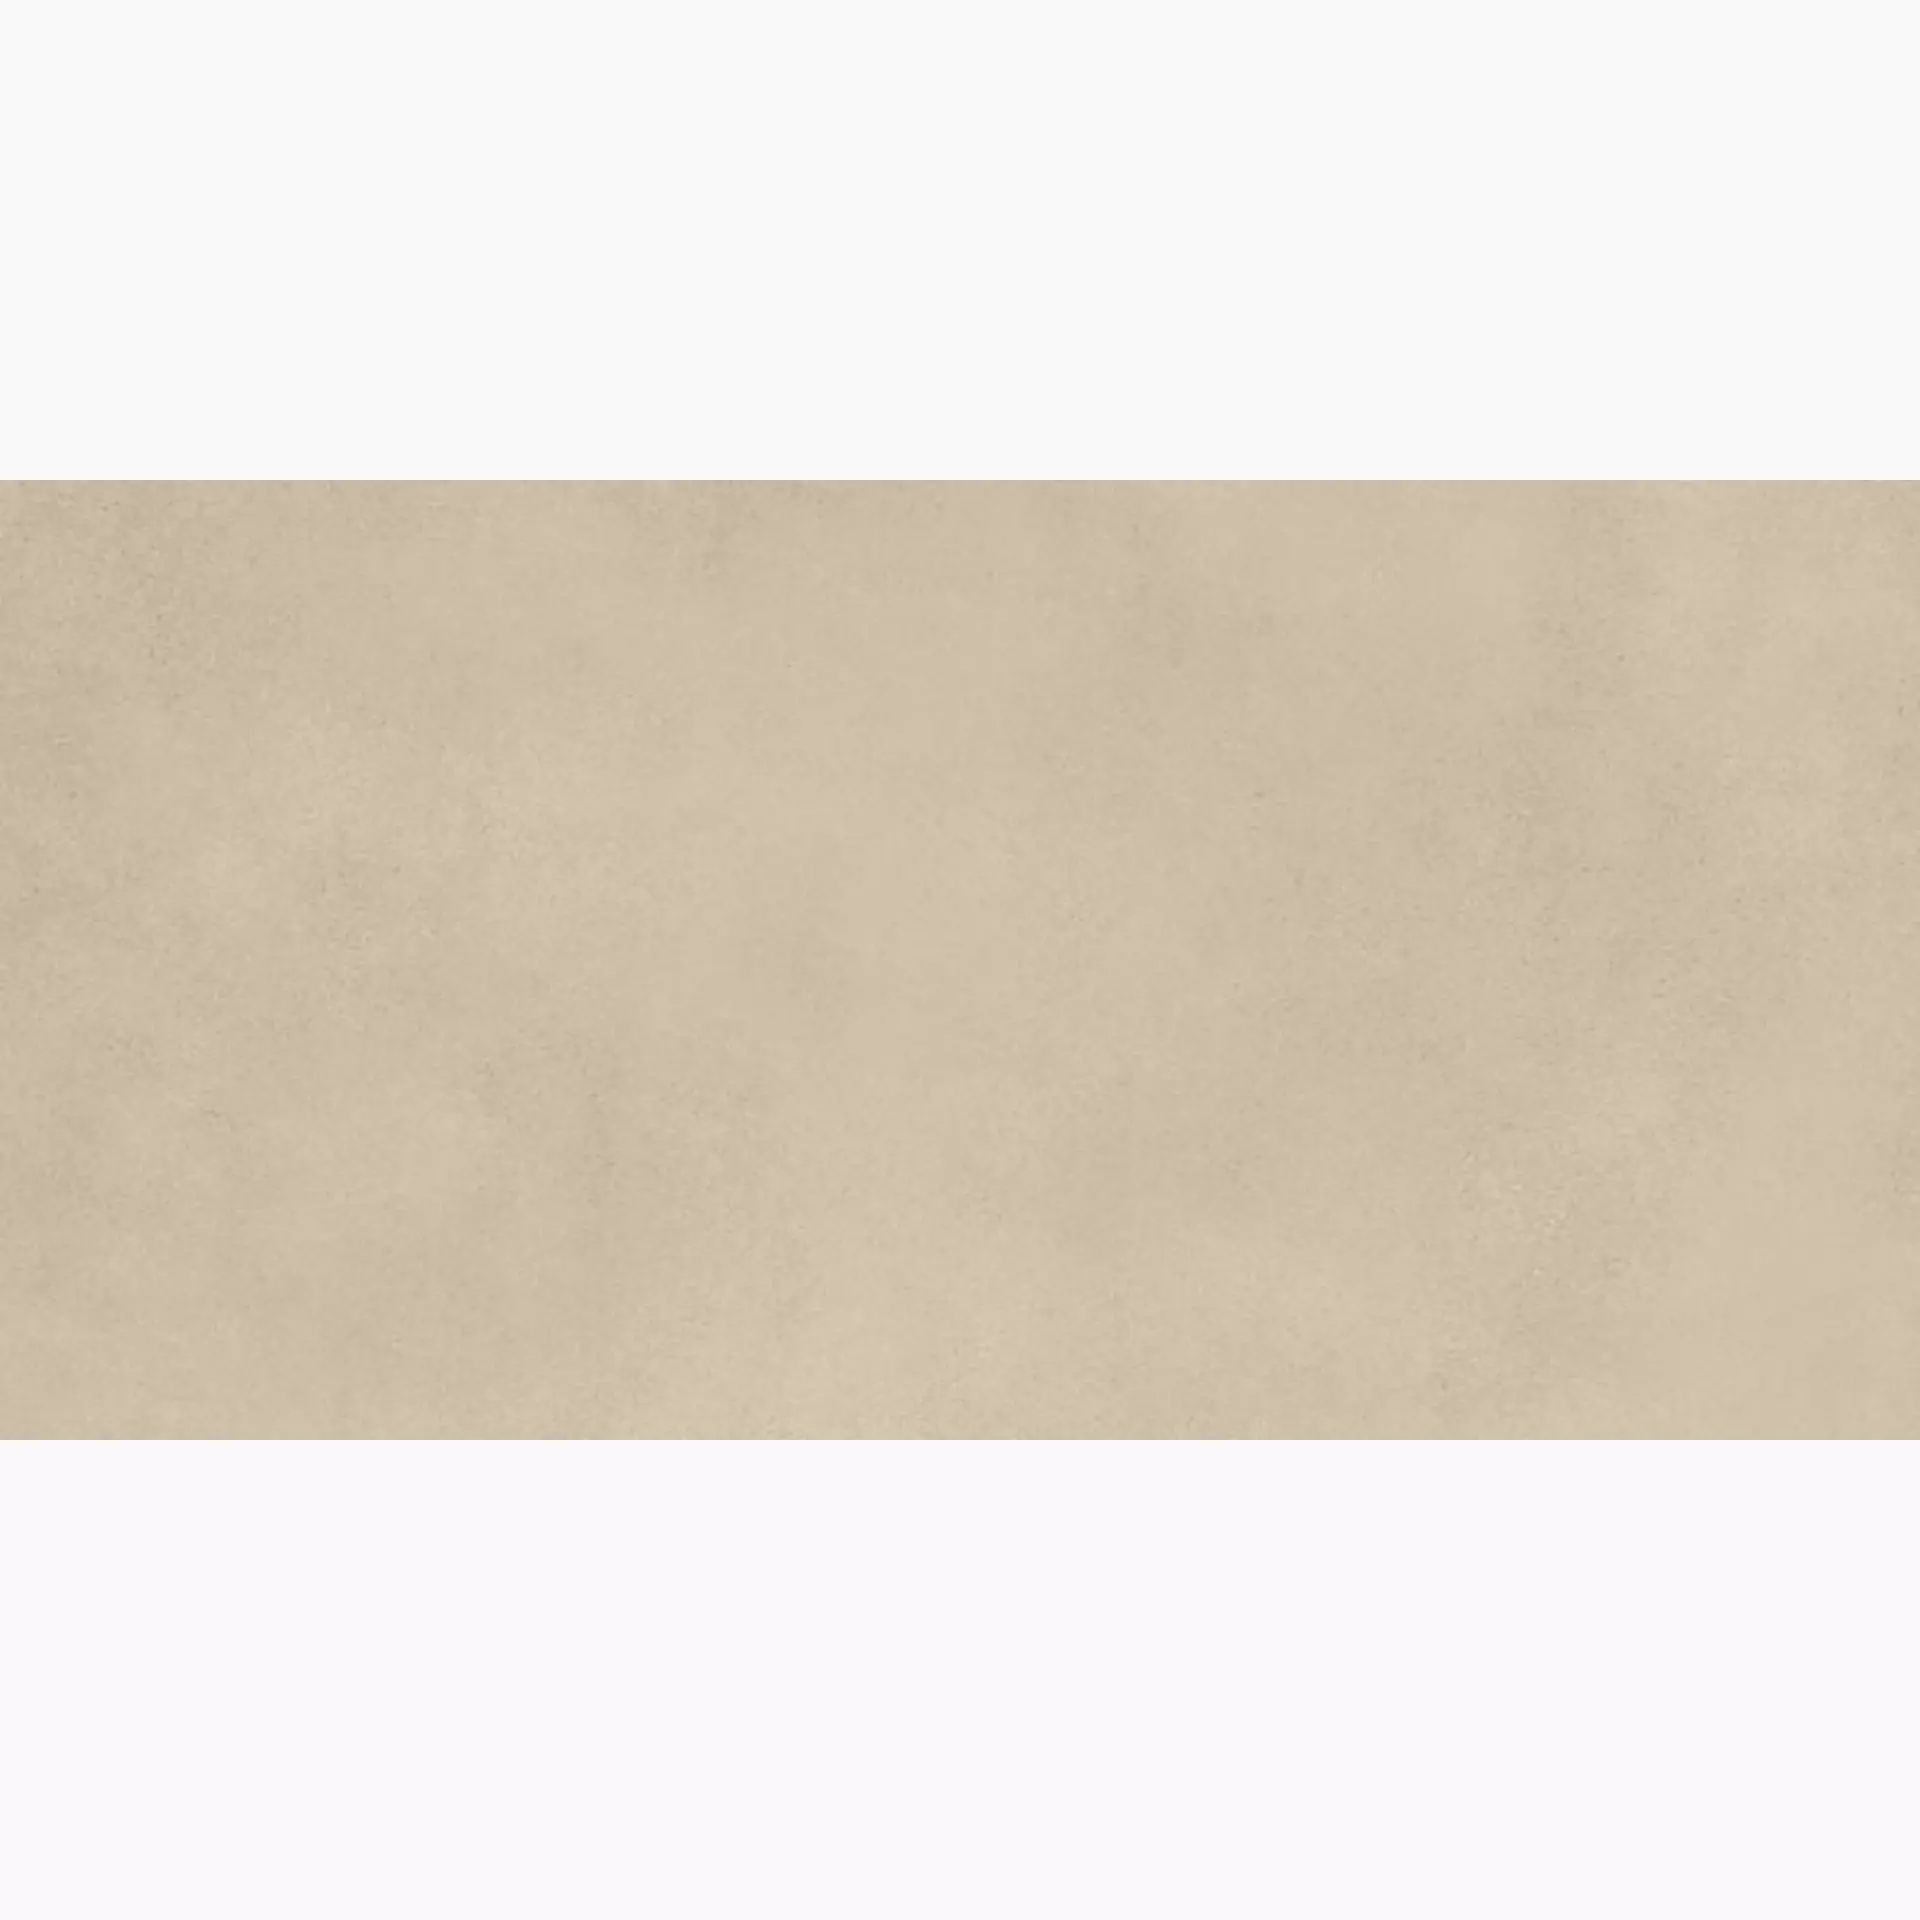 Sant Agostino Sable Beige Natural CSASABBE12 60x120cm rectified 10mm